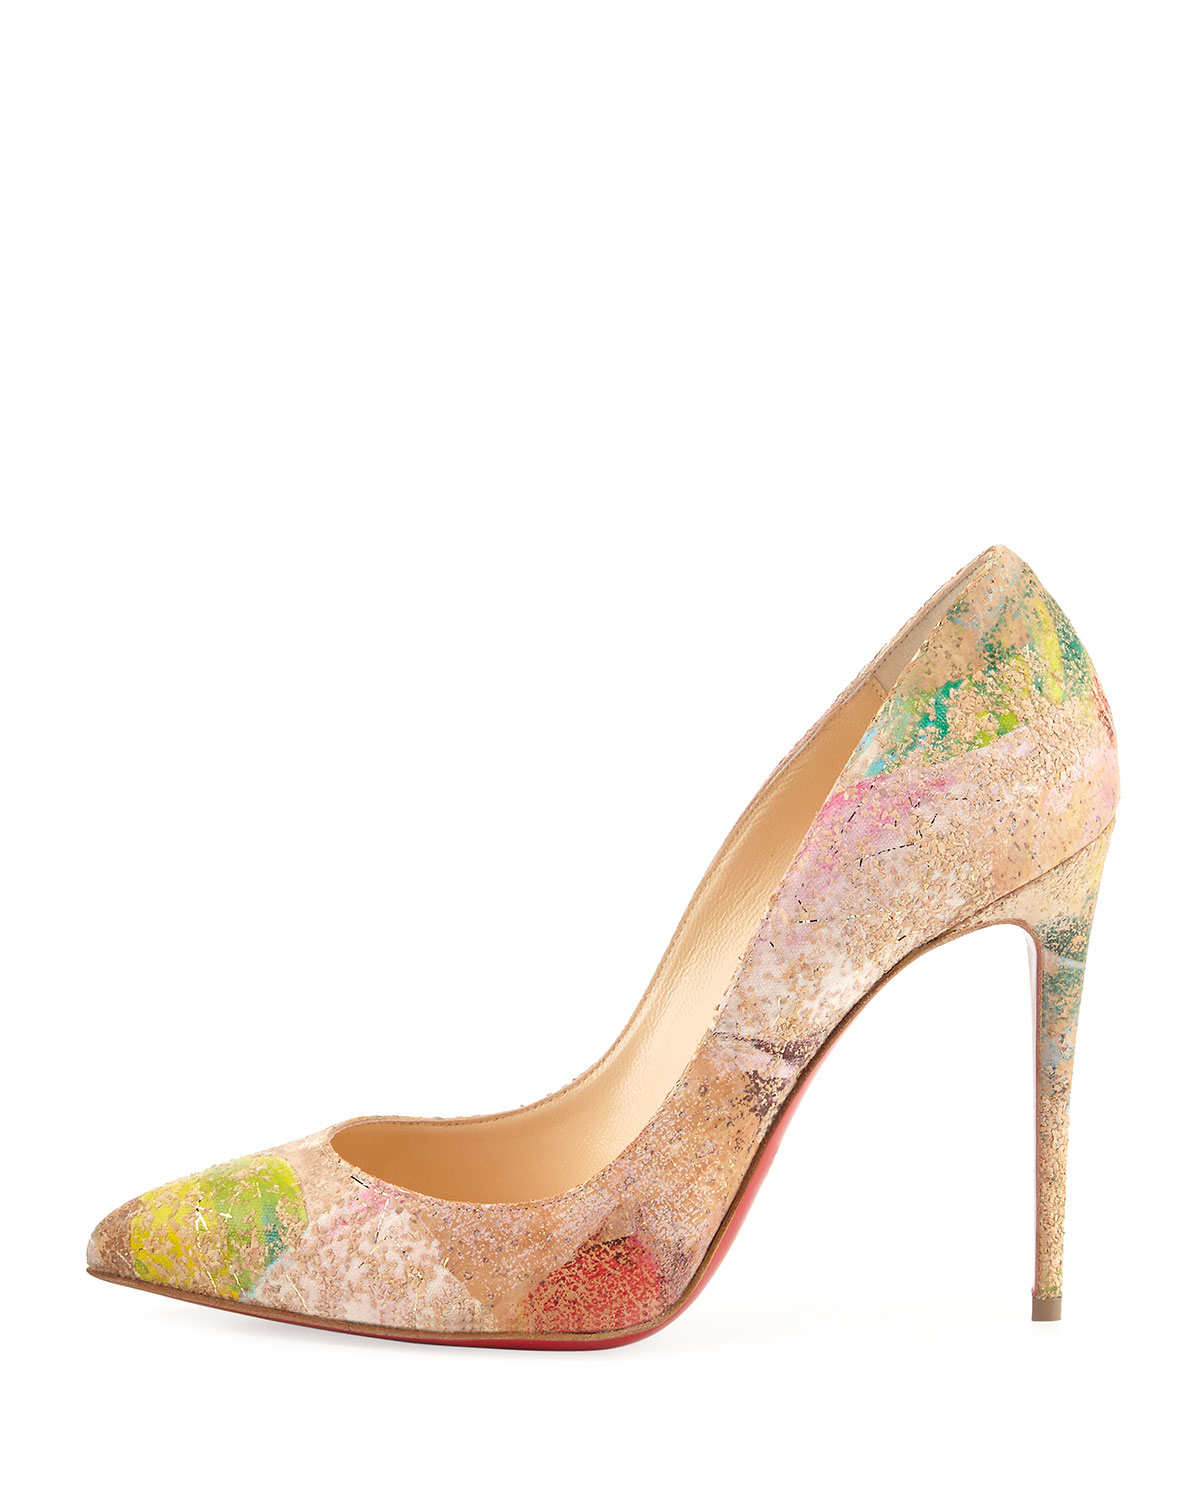 Christian louboutin Pigalles Follies Marble-Print Cork Pumps in ...